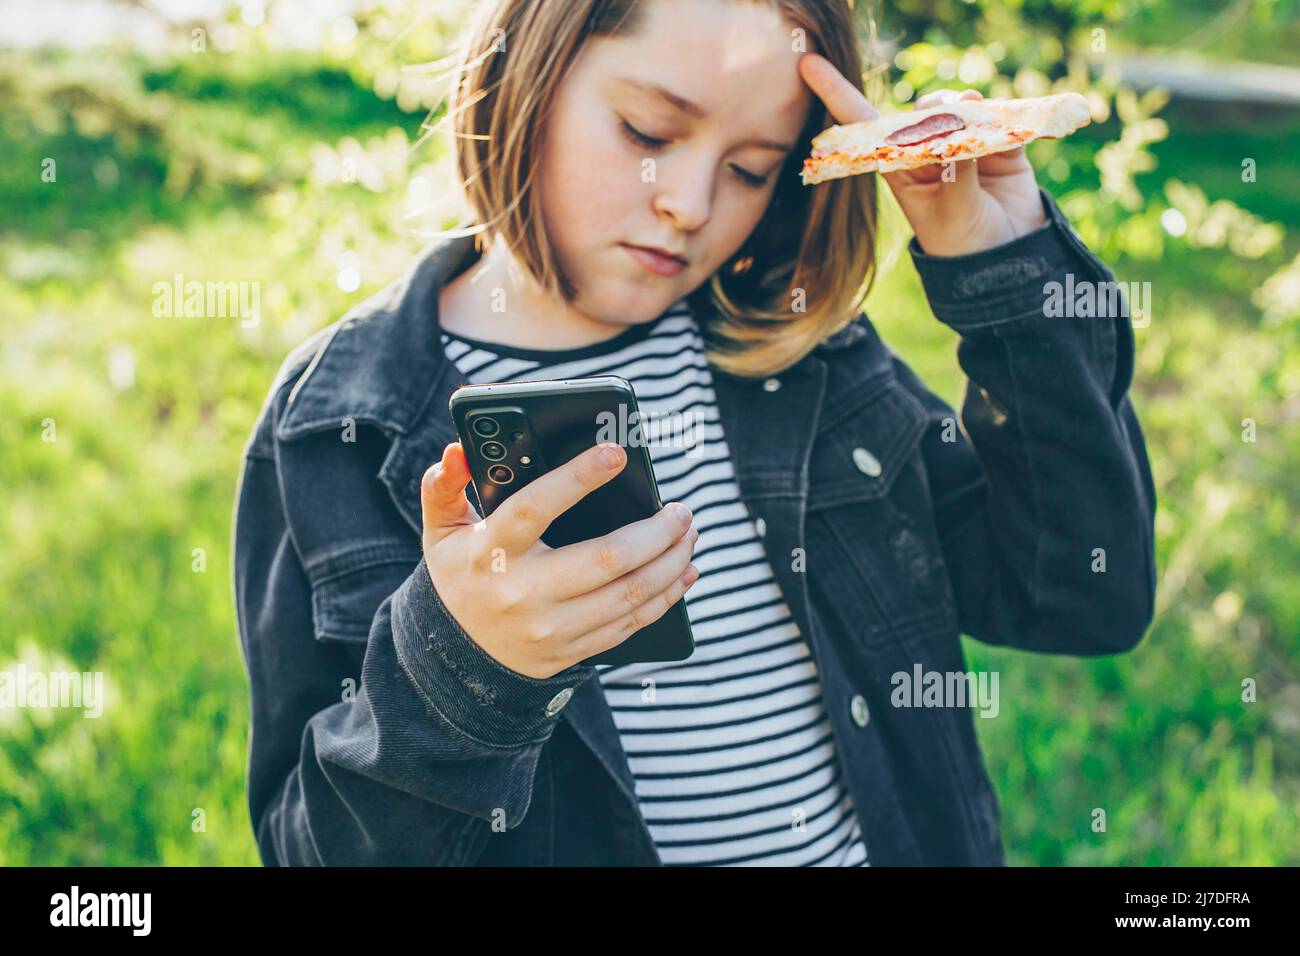 Preteen girl holding phone, using cell phone for chatting with friends. Concept of modern technology Stock Photo